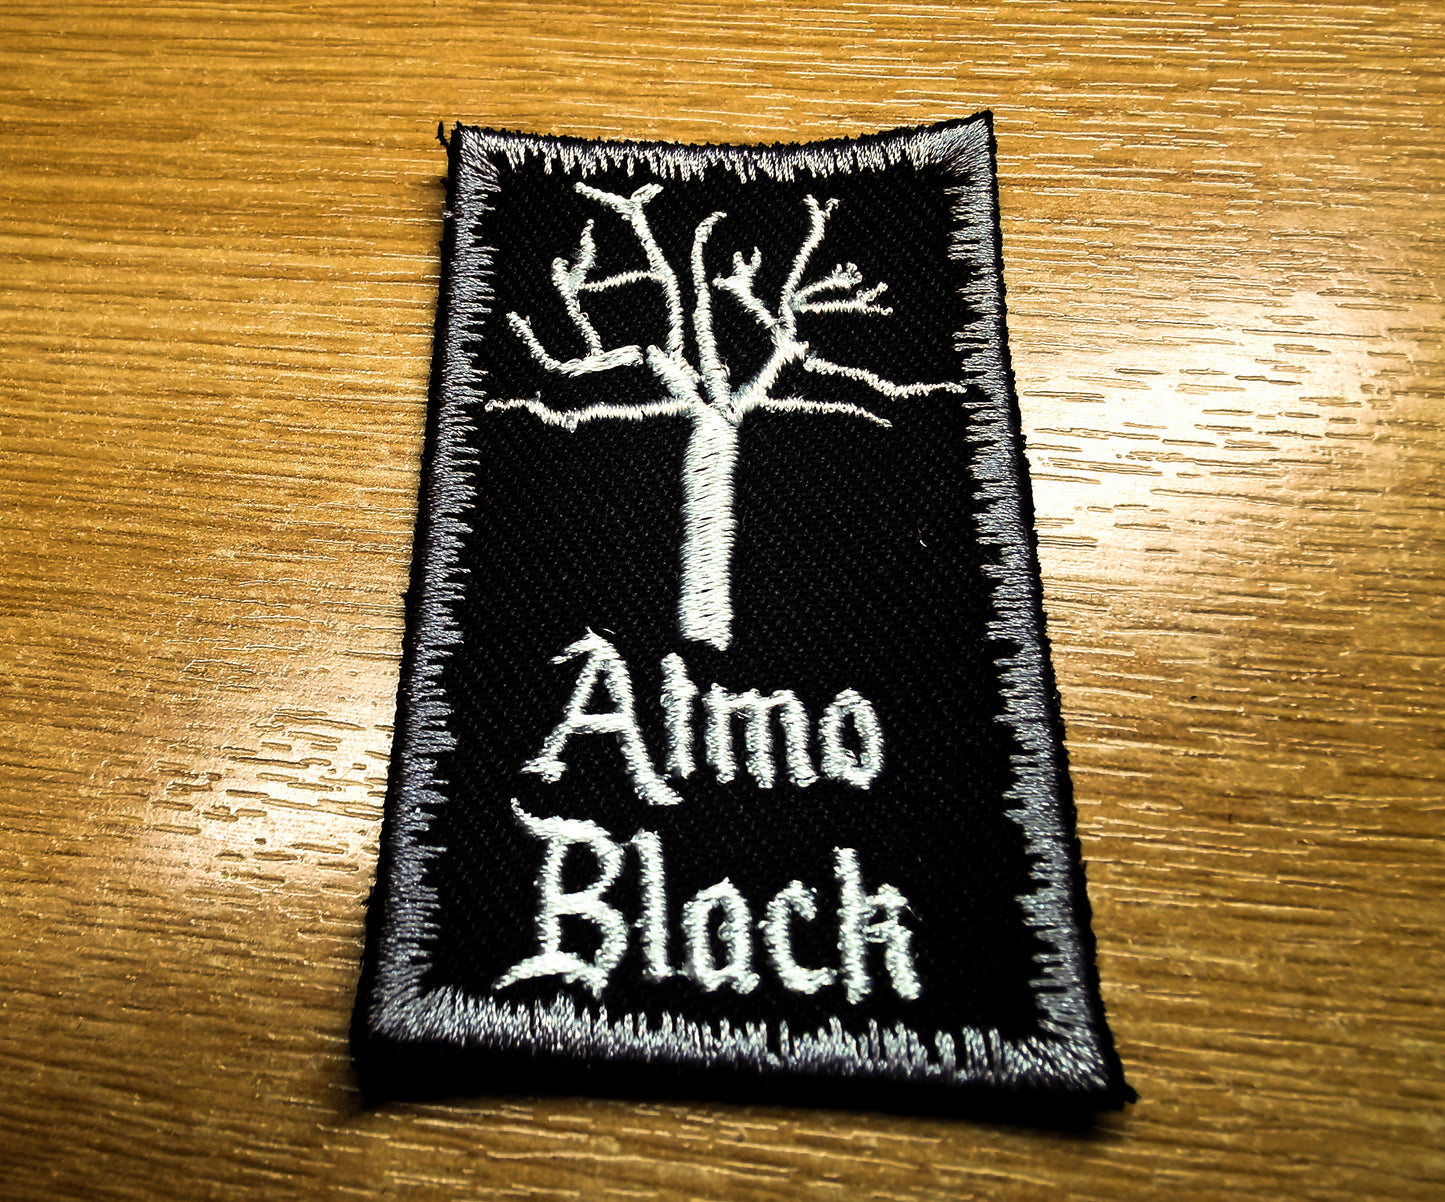 Atmospheric Black Metal Embroidered Patch Dead Tree and Pewter Snow Border